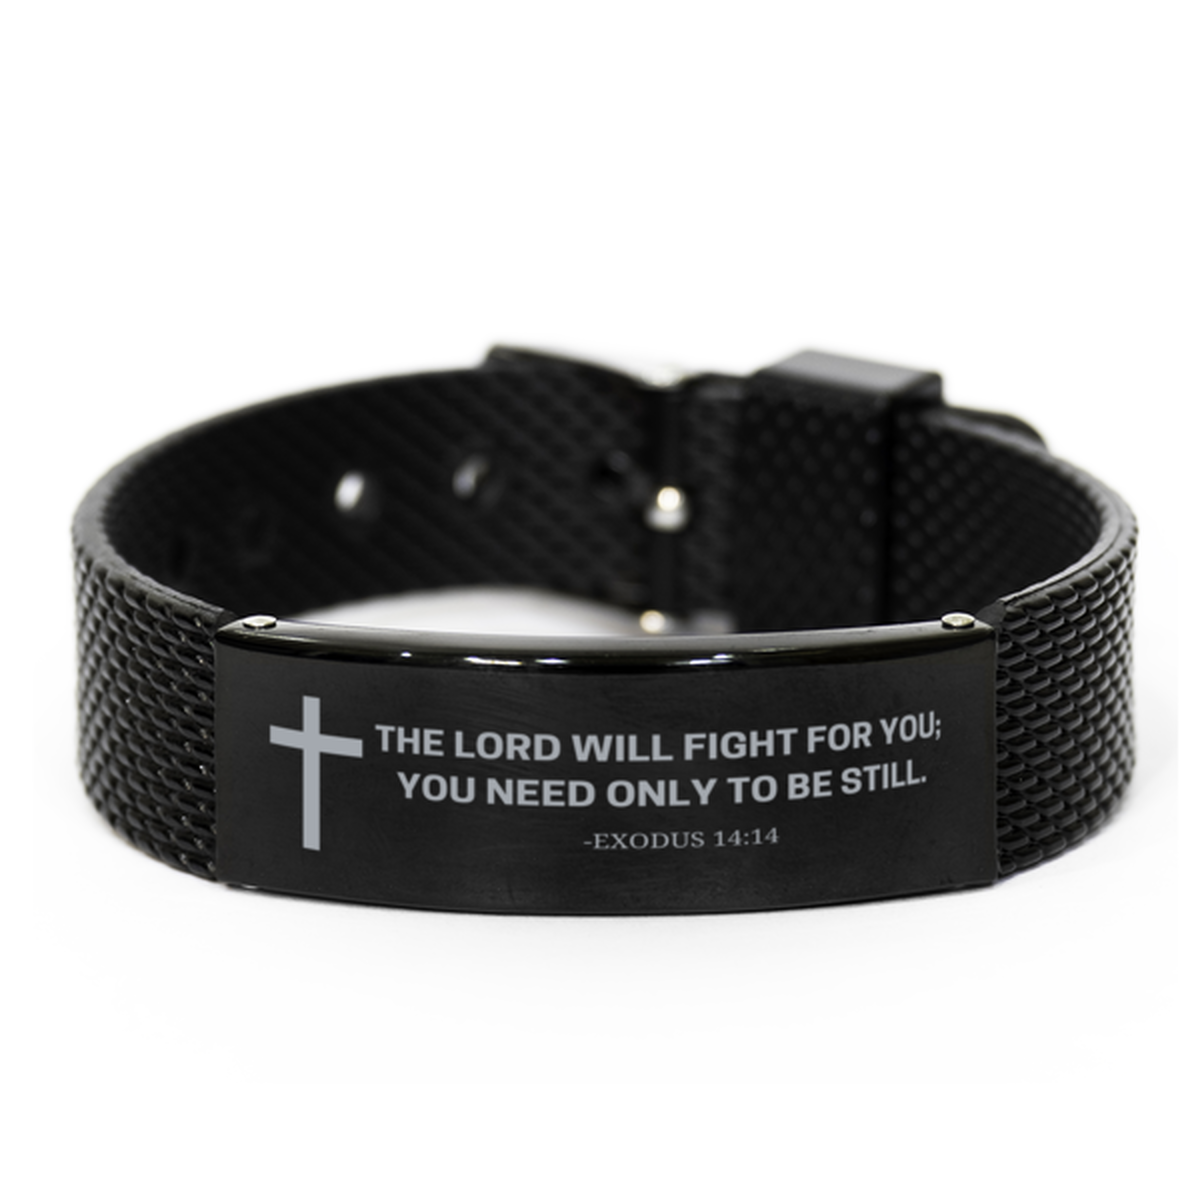 Baptism Gifts For Teenage Boys Girls, Christian Bible Verse Black Shark Mesh Bracelet, The Lord will fight for you, Catholic Confirmation Gifts for Son, Godson, Grandson, Nephew